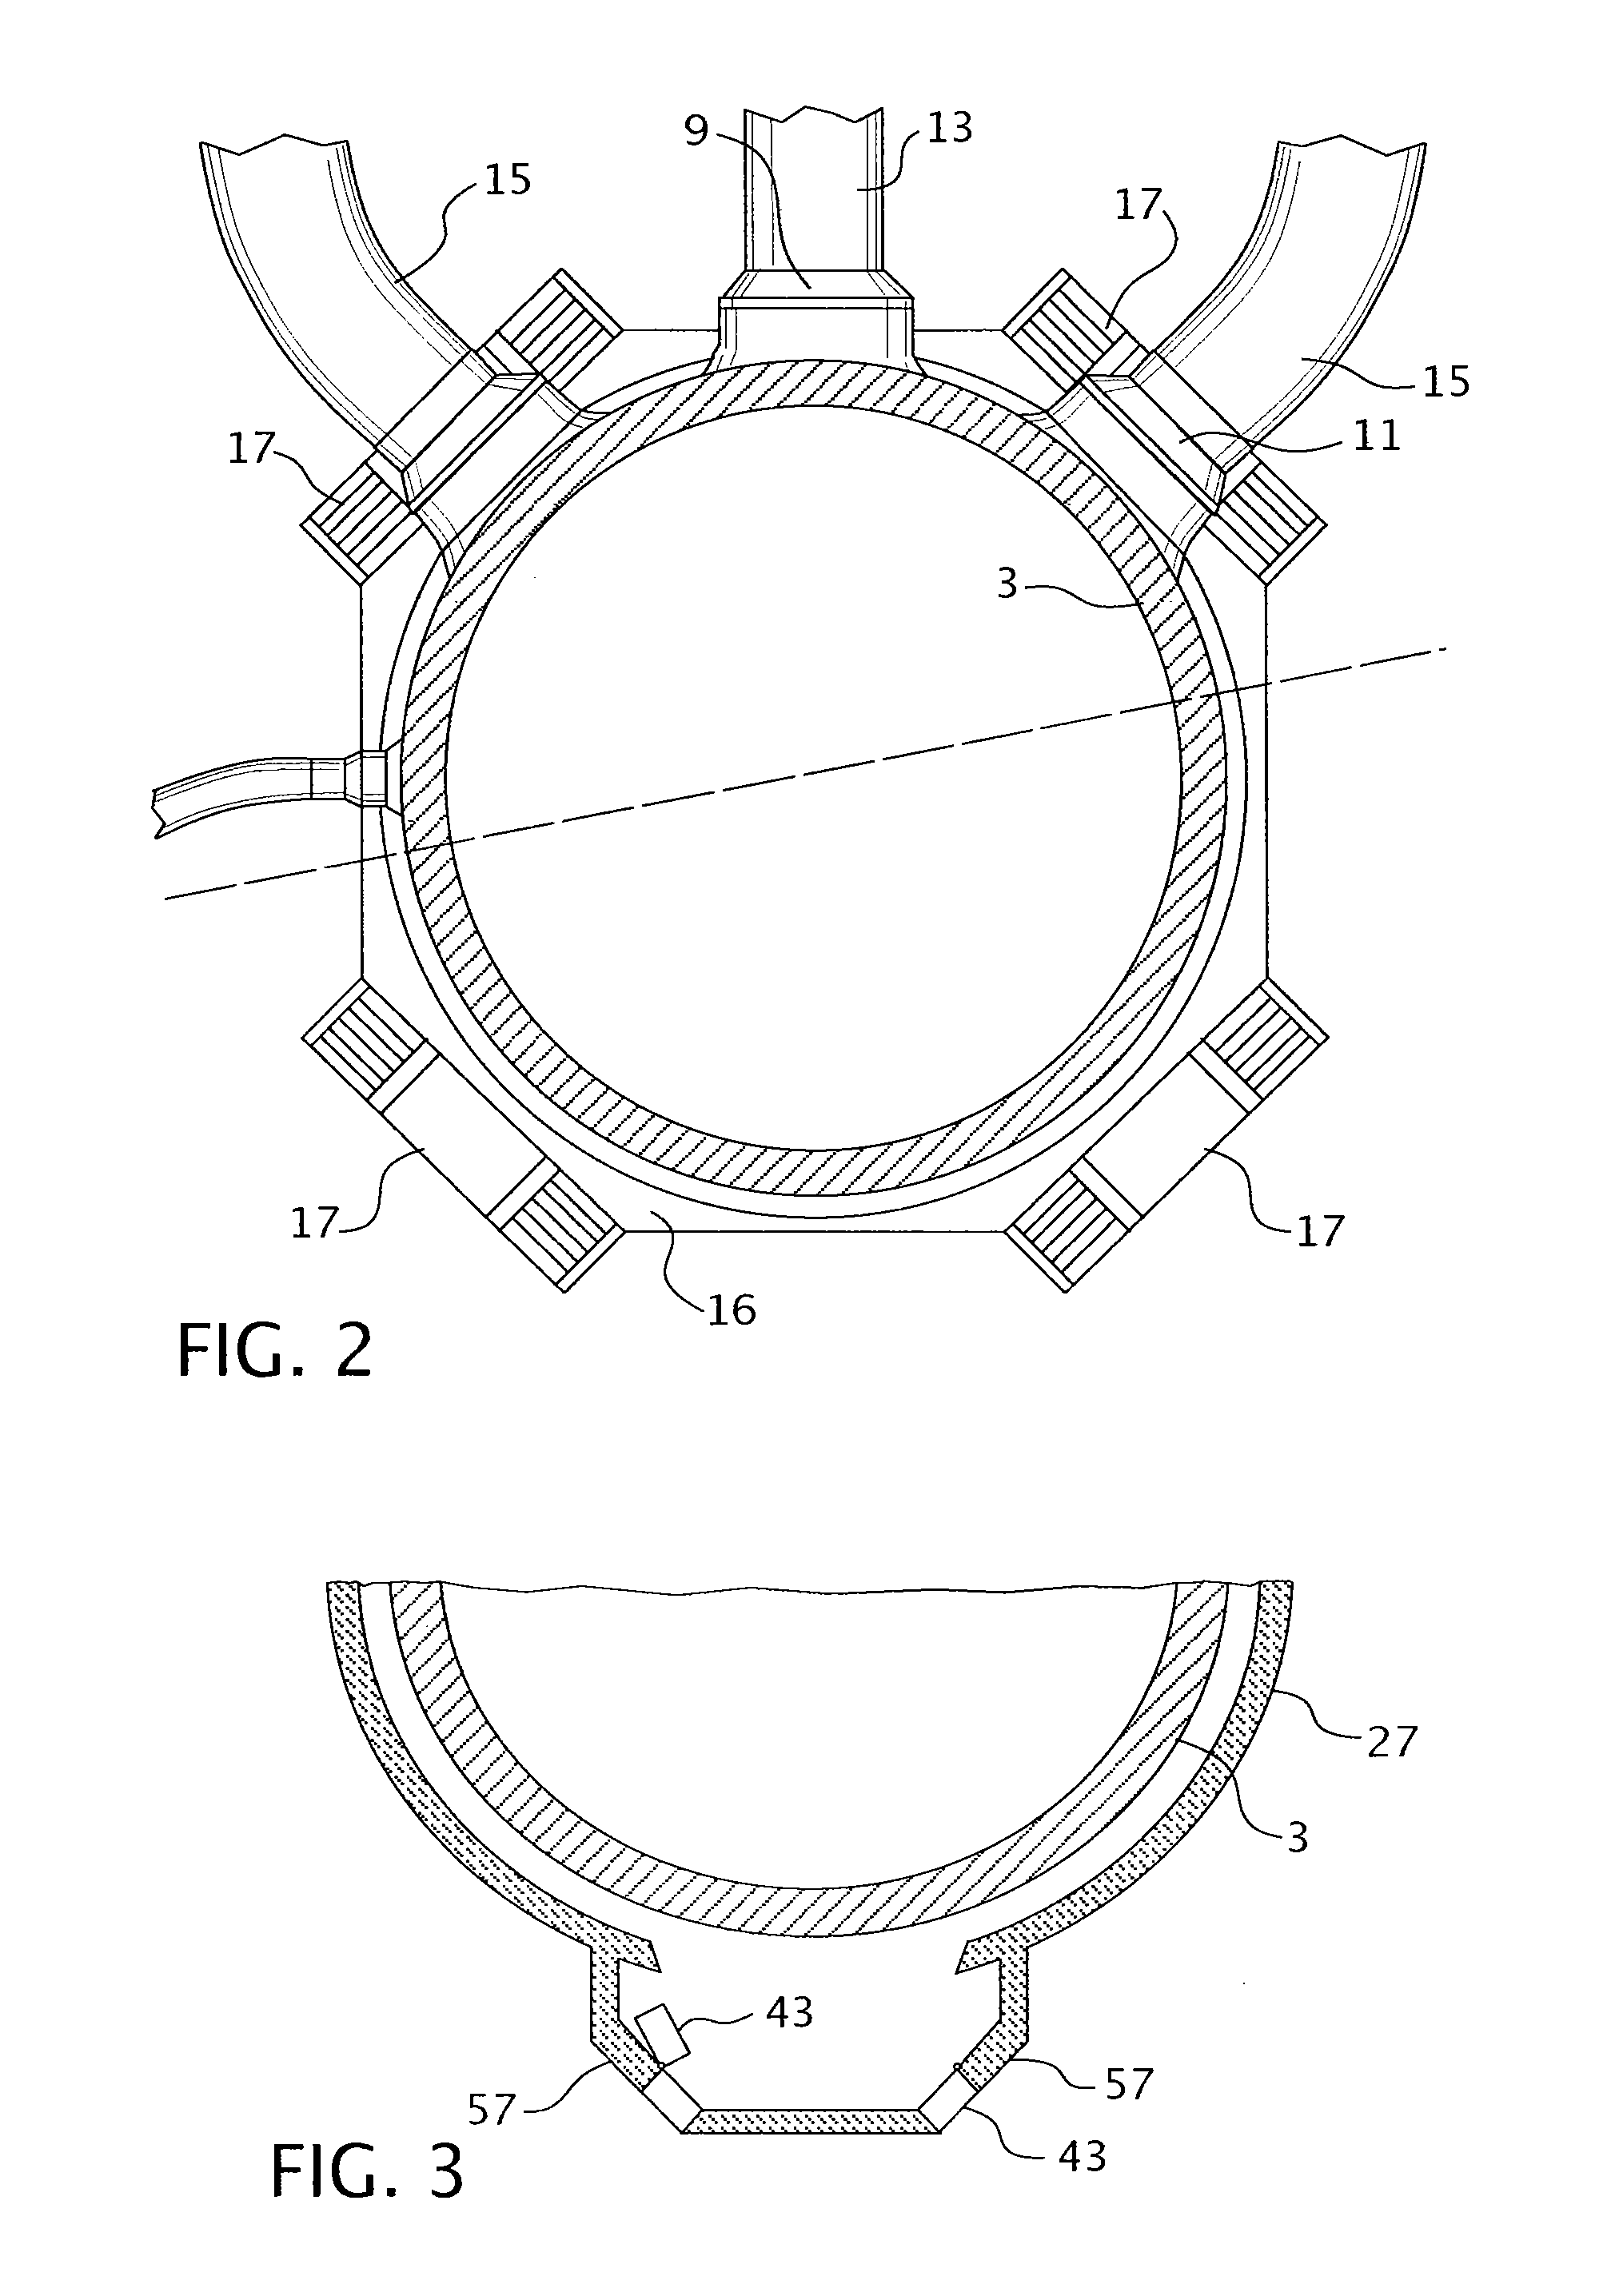 Nuclear reactor vessel fuel thermal insulating barrier